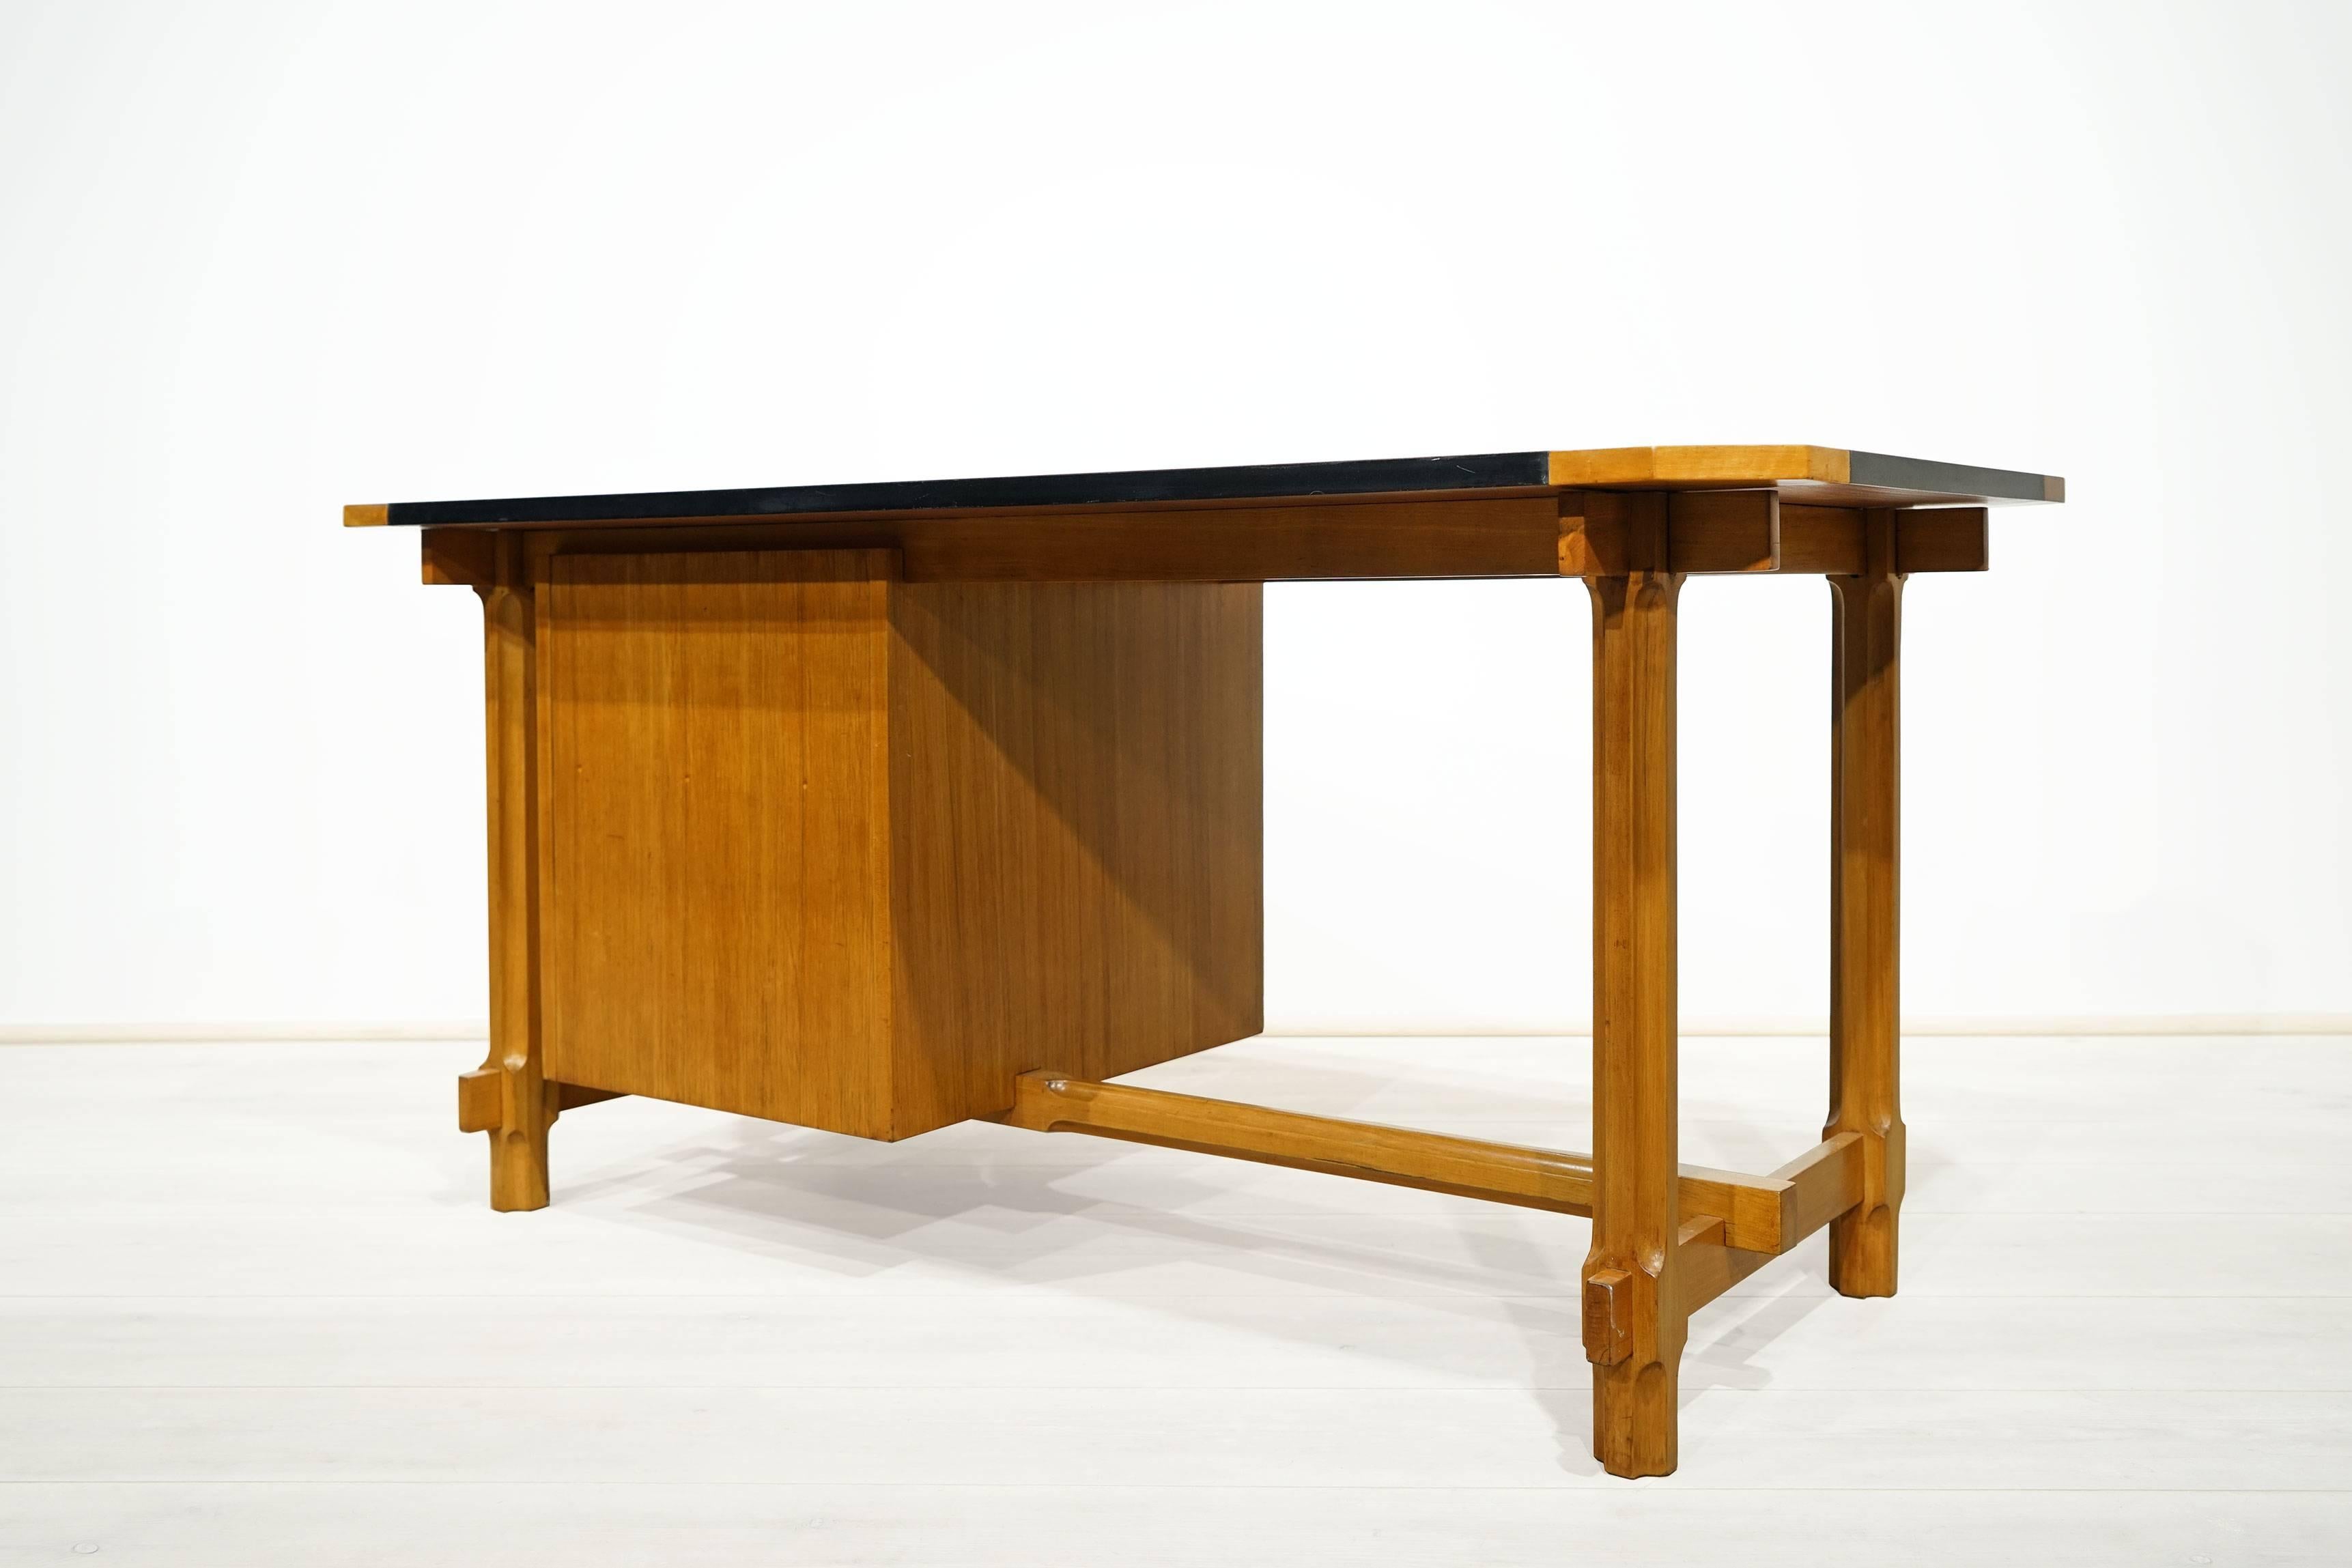 Lacquered Desk by Ico Parisi Manufactured by Fratelli Rizzi, Cantù 1959